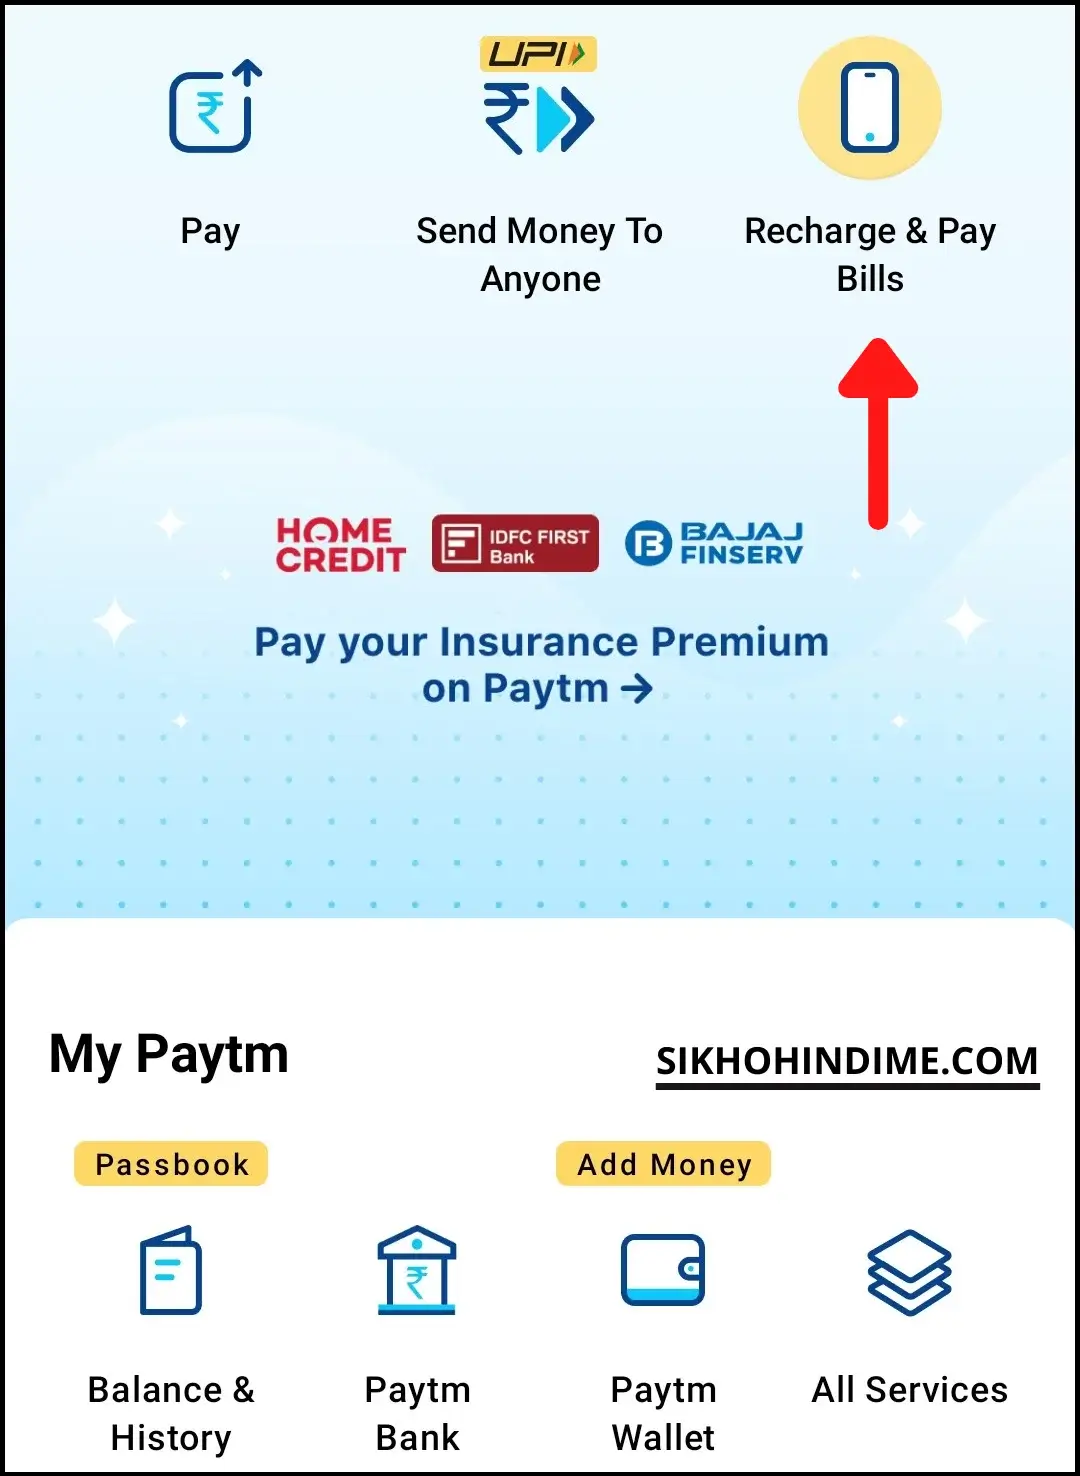 Click on Recharge and Pay Bills